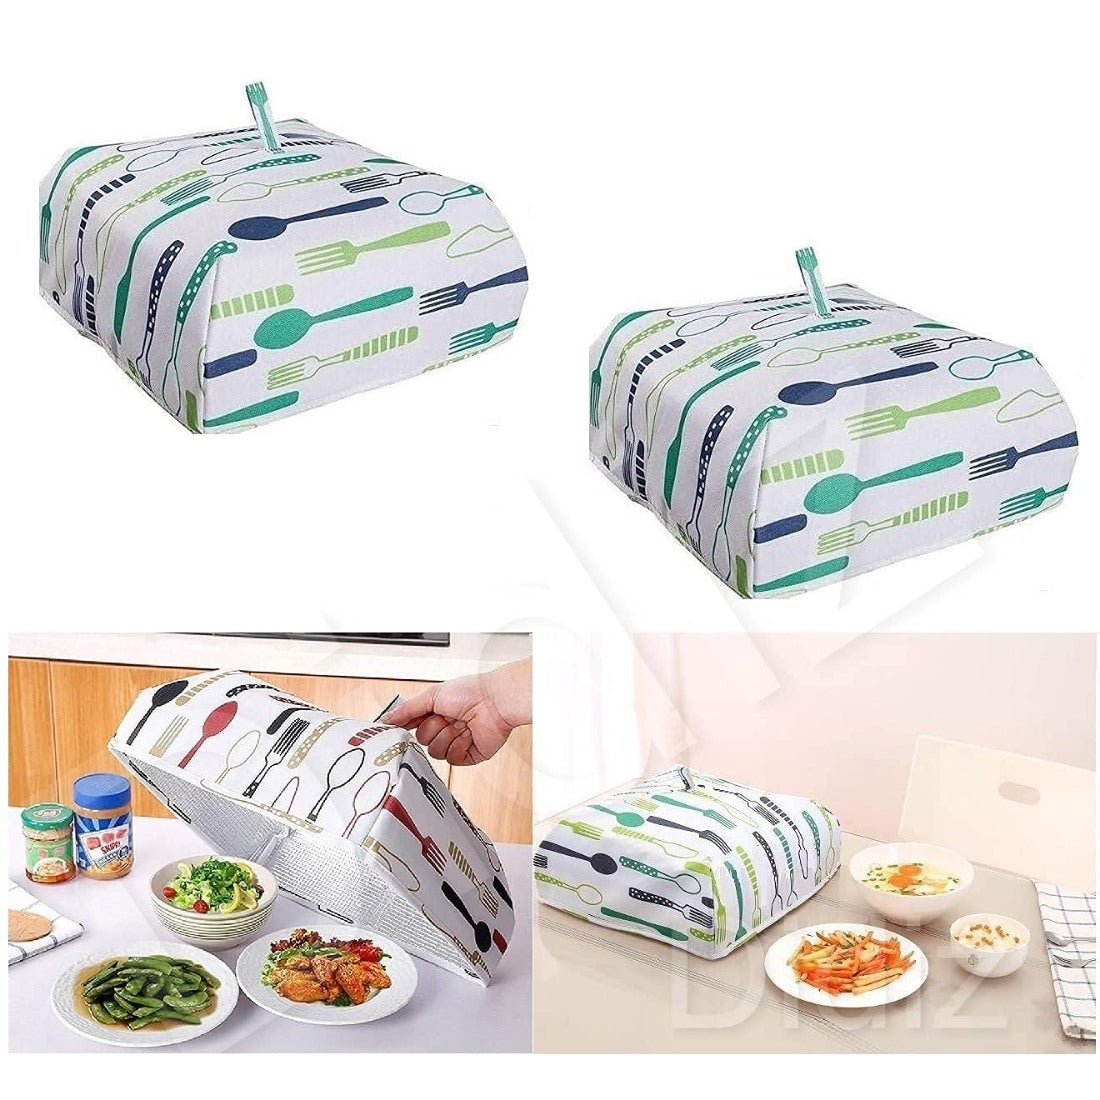 Generic Foldable Insulated Food Cover with Table Hot Food Insulation Cover Dish Kitchen Food Cover  (Color: Assorted)